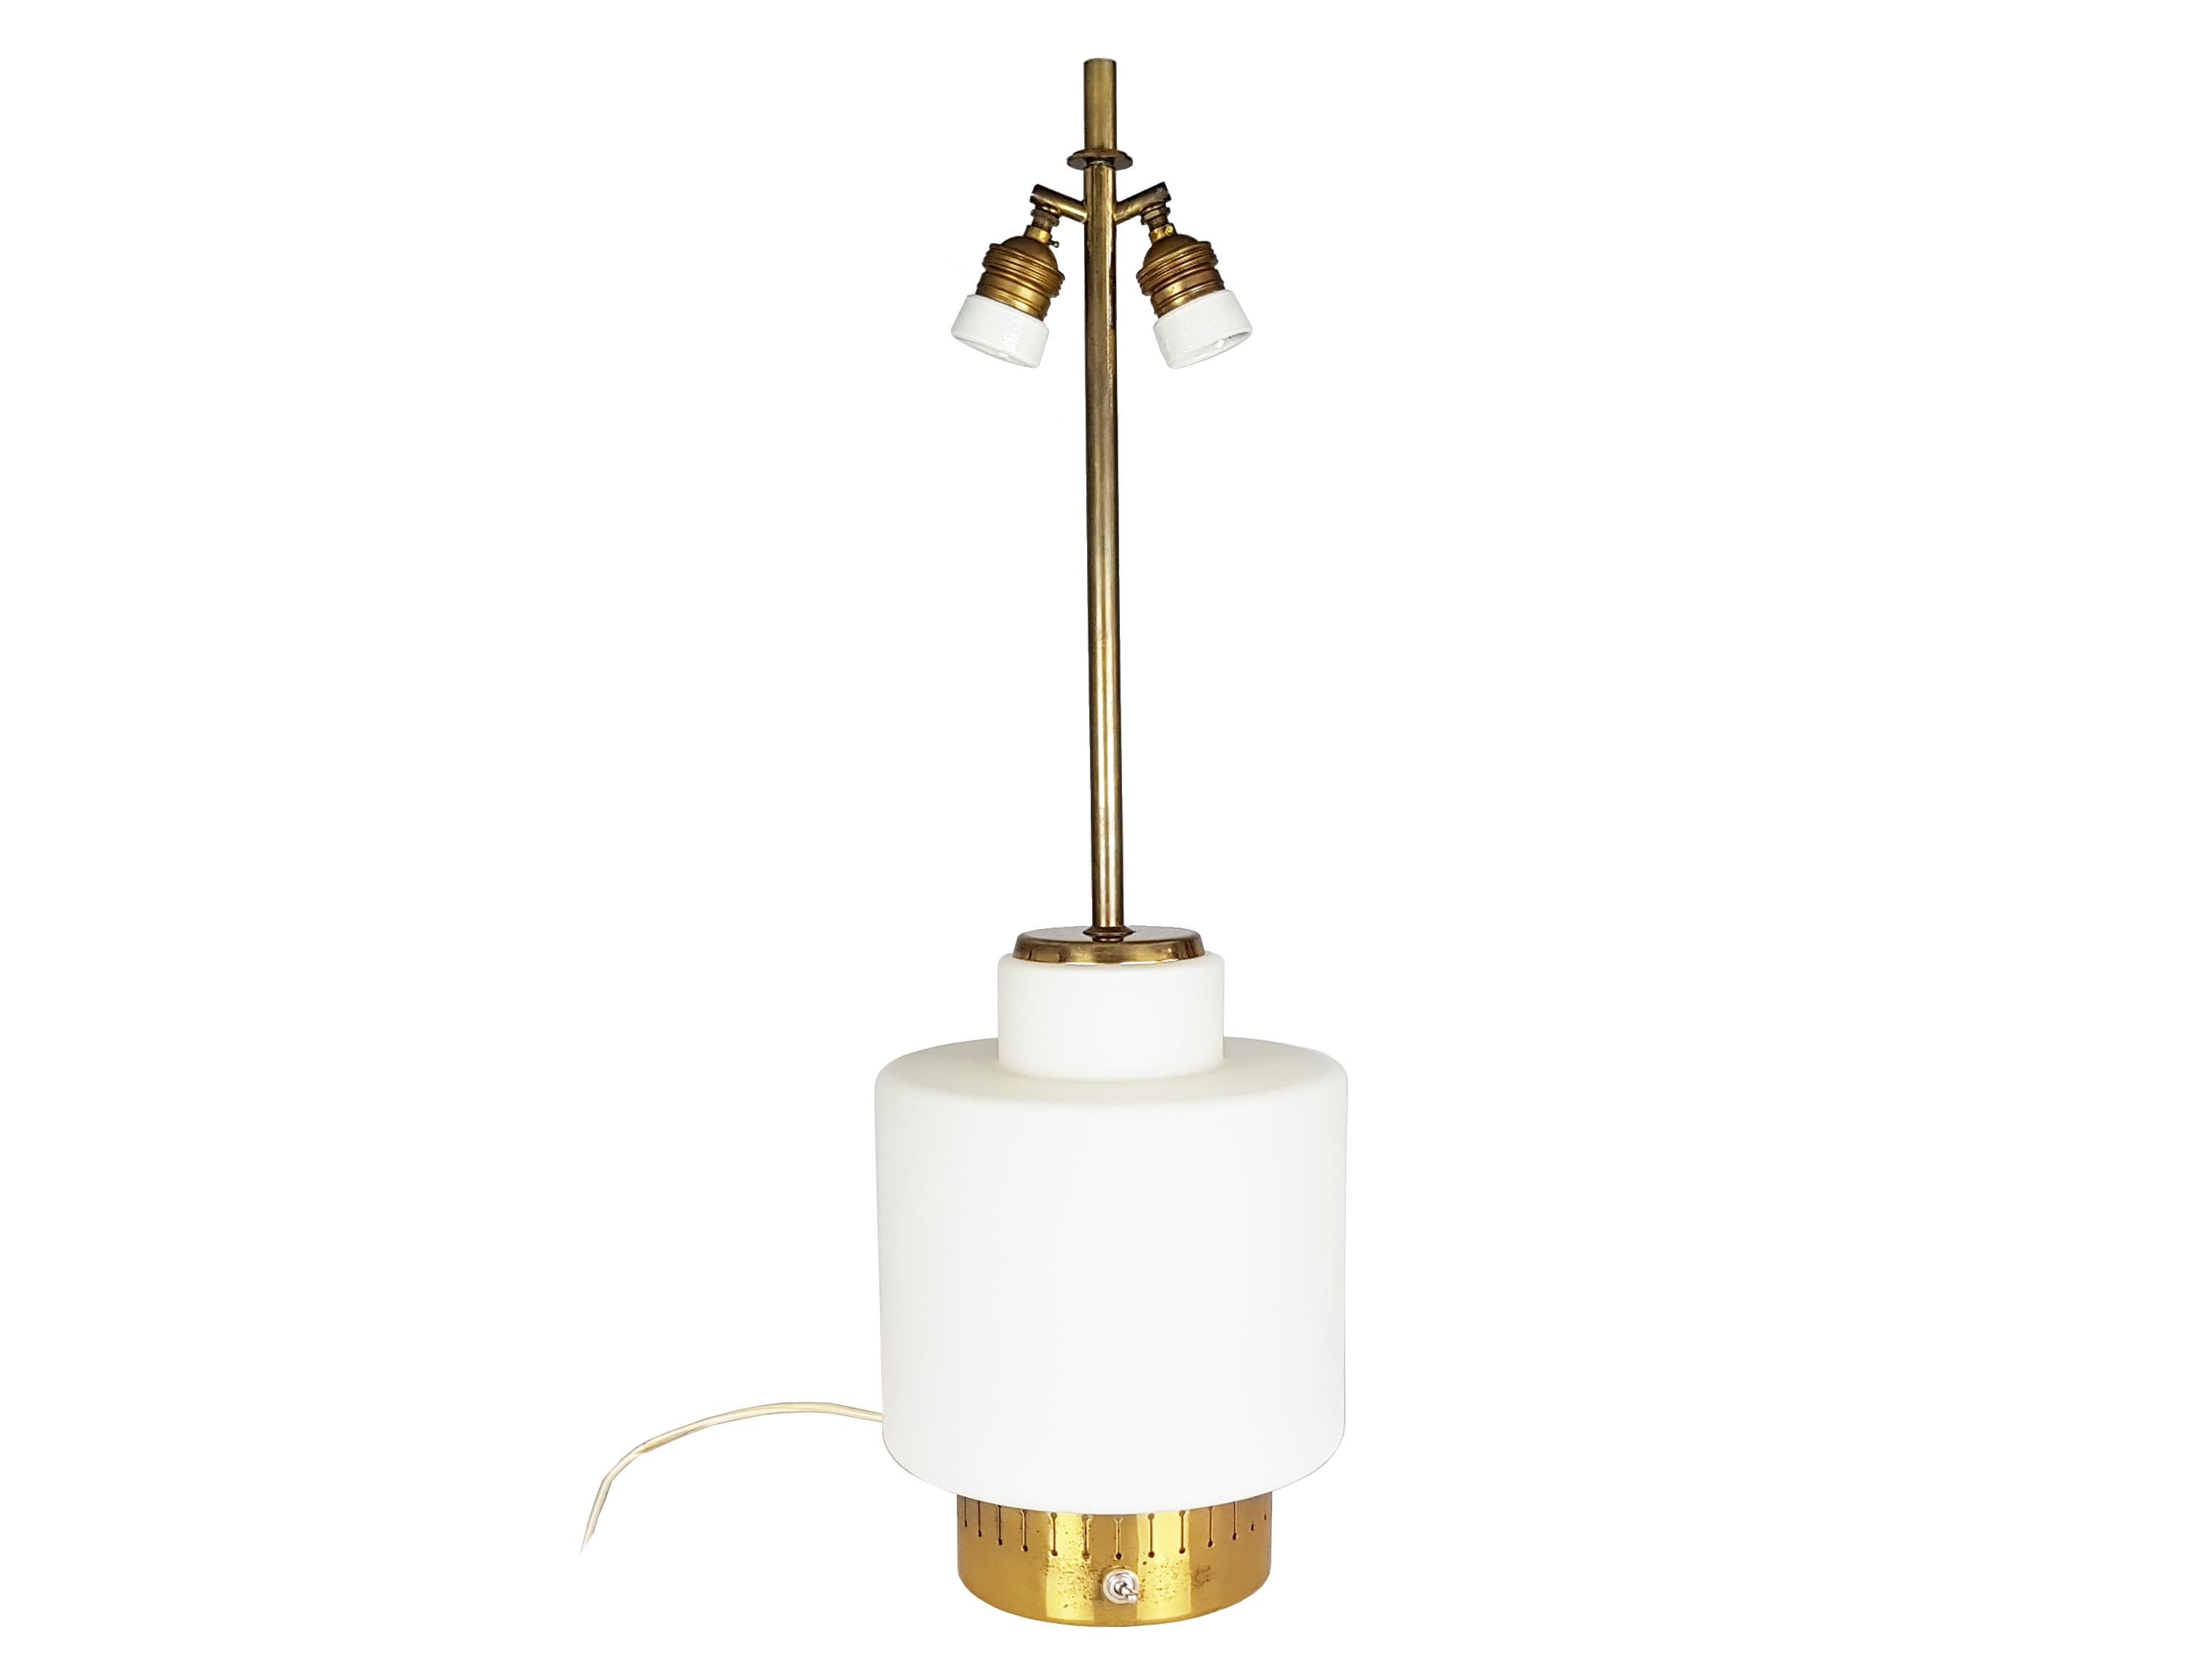 This elegant abat jour was designed and produced by Stilnovo in the late 1950s. It is made from a white opaline glass shade with an elegant brass structure. A switch on the base manages the simultaneous lighting of 3 bulbs: one internal and two